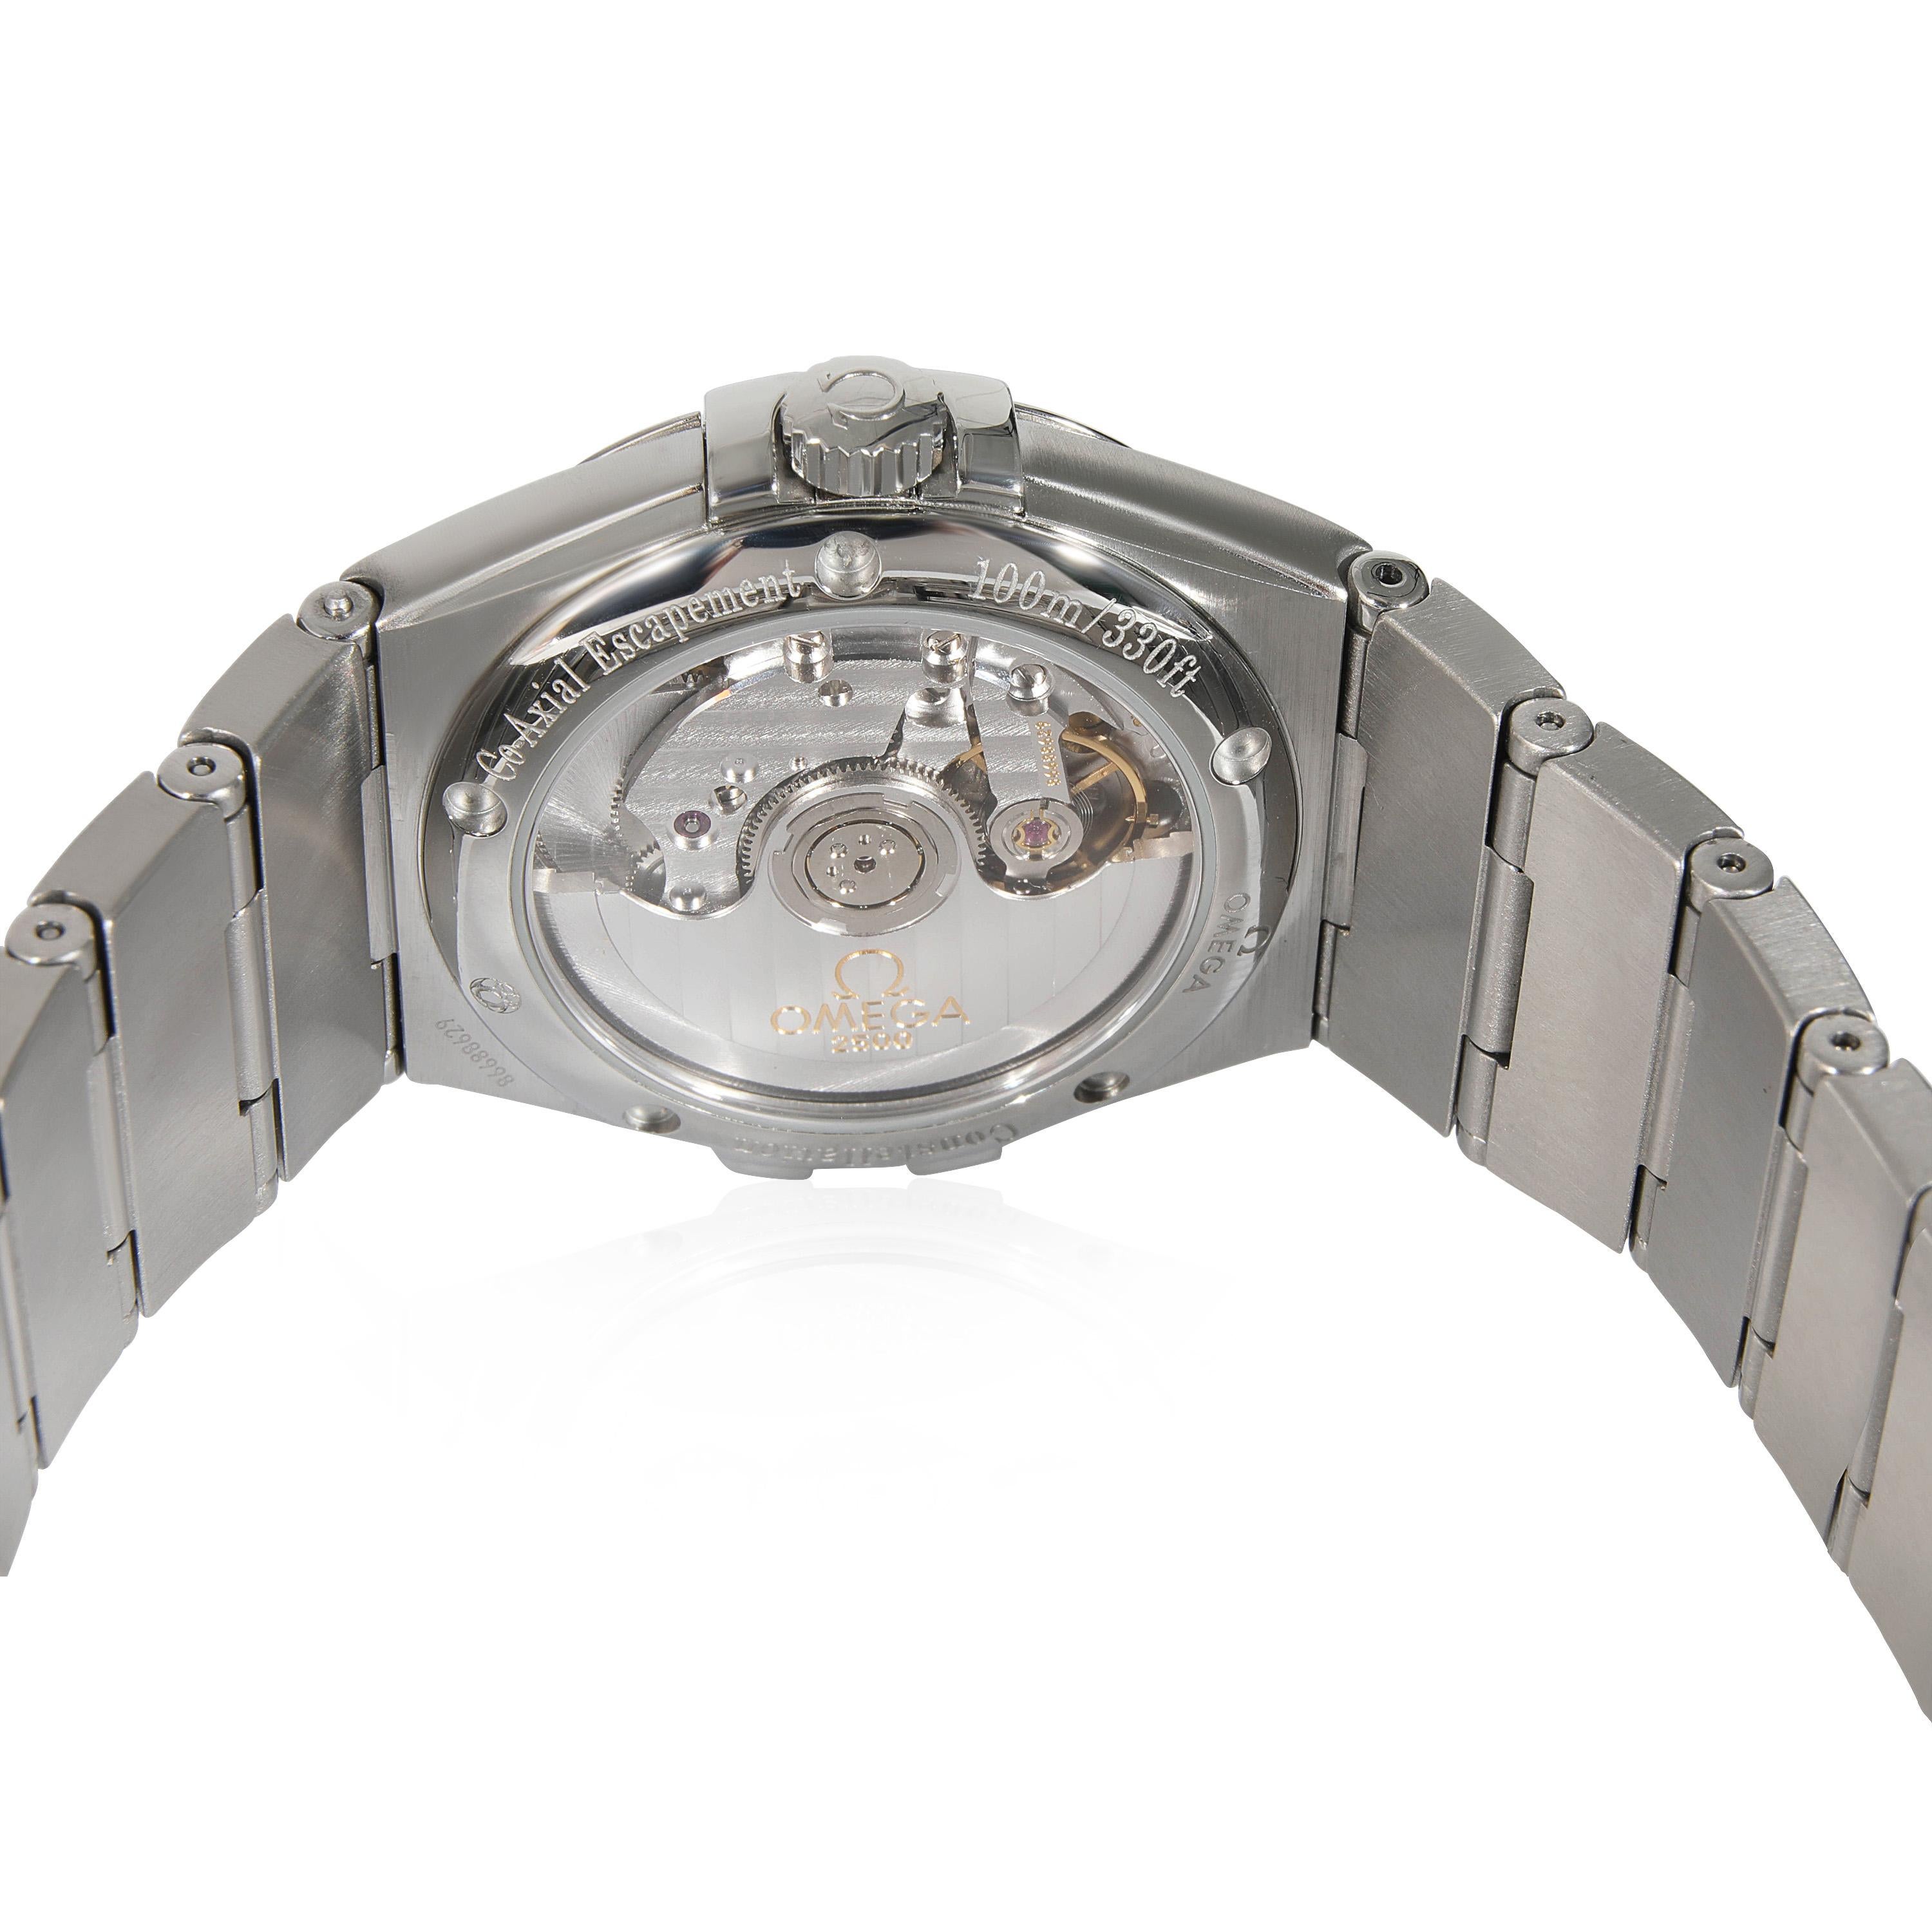 Omega Constellation 123.10.35.20.02.001 Unisex Watch in  Stainless Steel

SKU: 130813

PRIMARY DETAILS
Brand: Omega
Model: Constellation
Country of Origin: Switzerland
Movement Type: Mechanical: Automatic/Kinetic
Year Manufactured: 2018
Year of